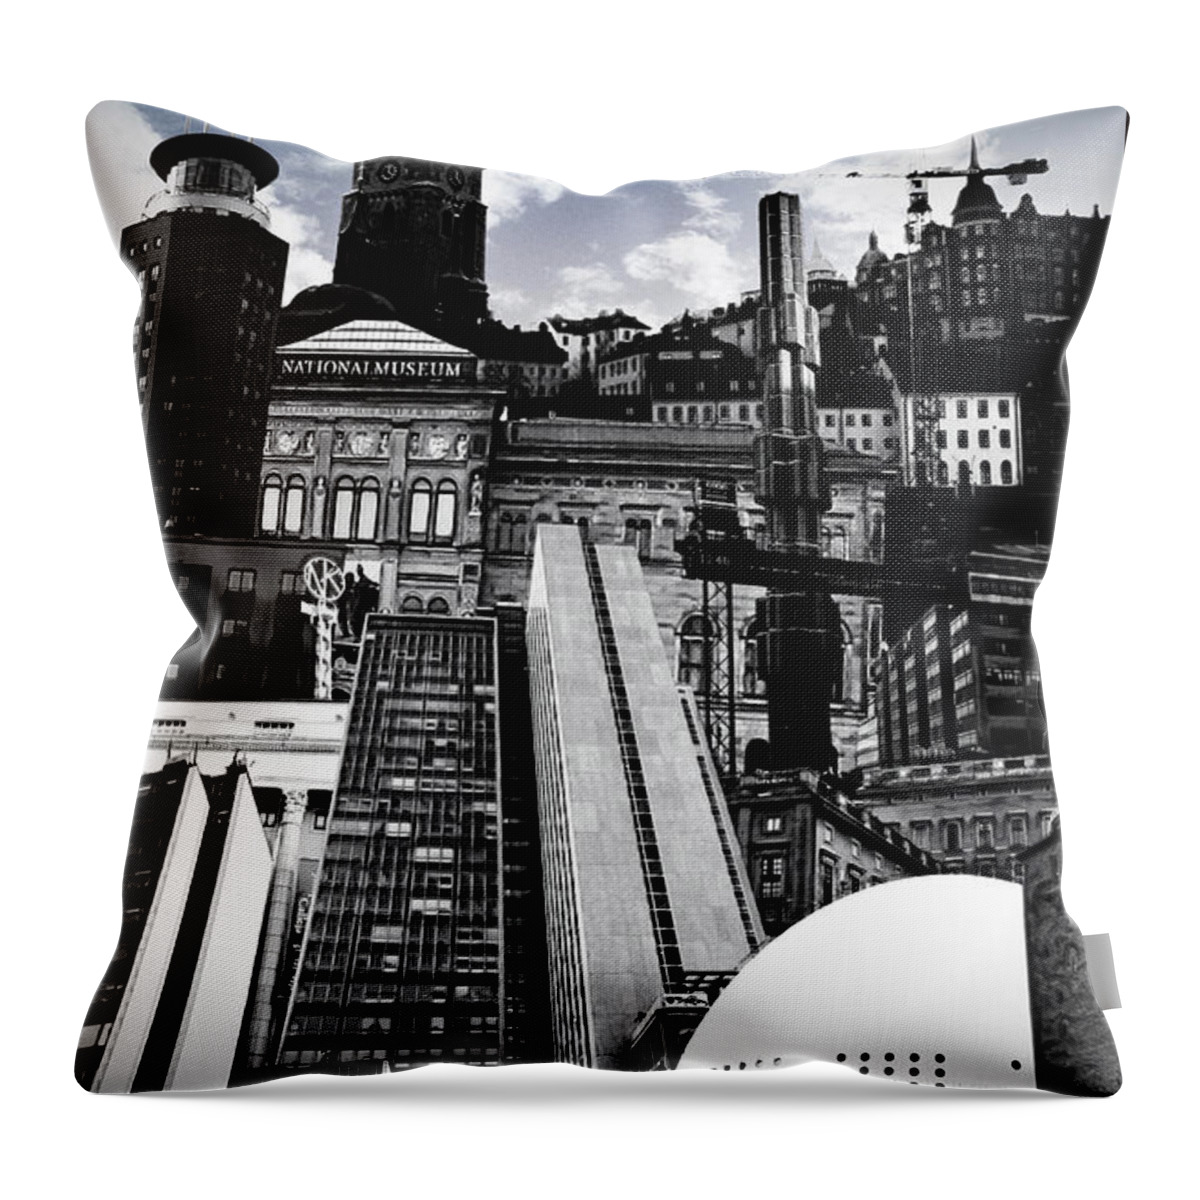 City Throw Pillow featuring the photograph Urban Stockholm by Nicklas Gustafsson